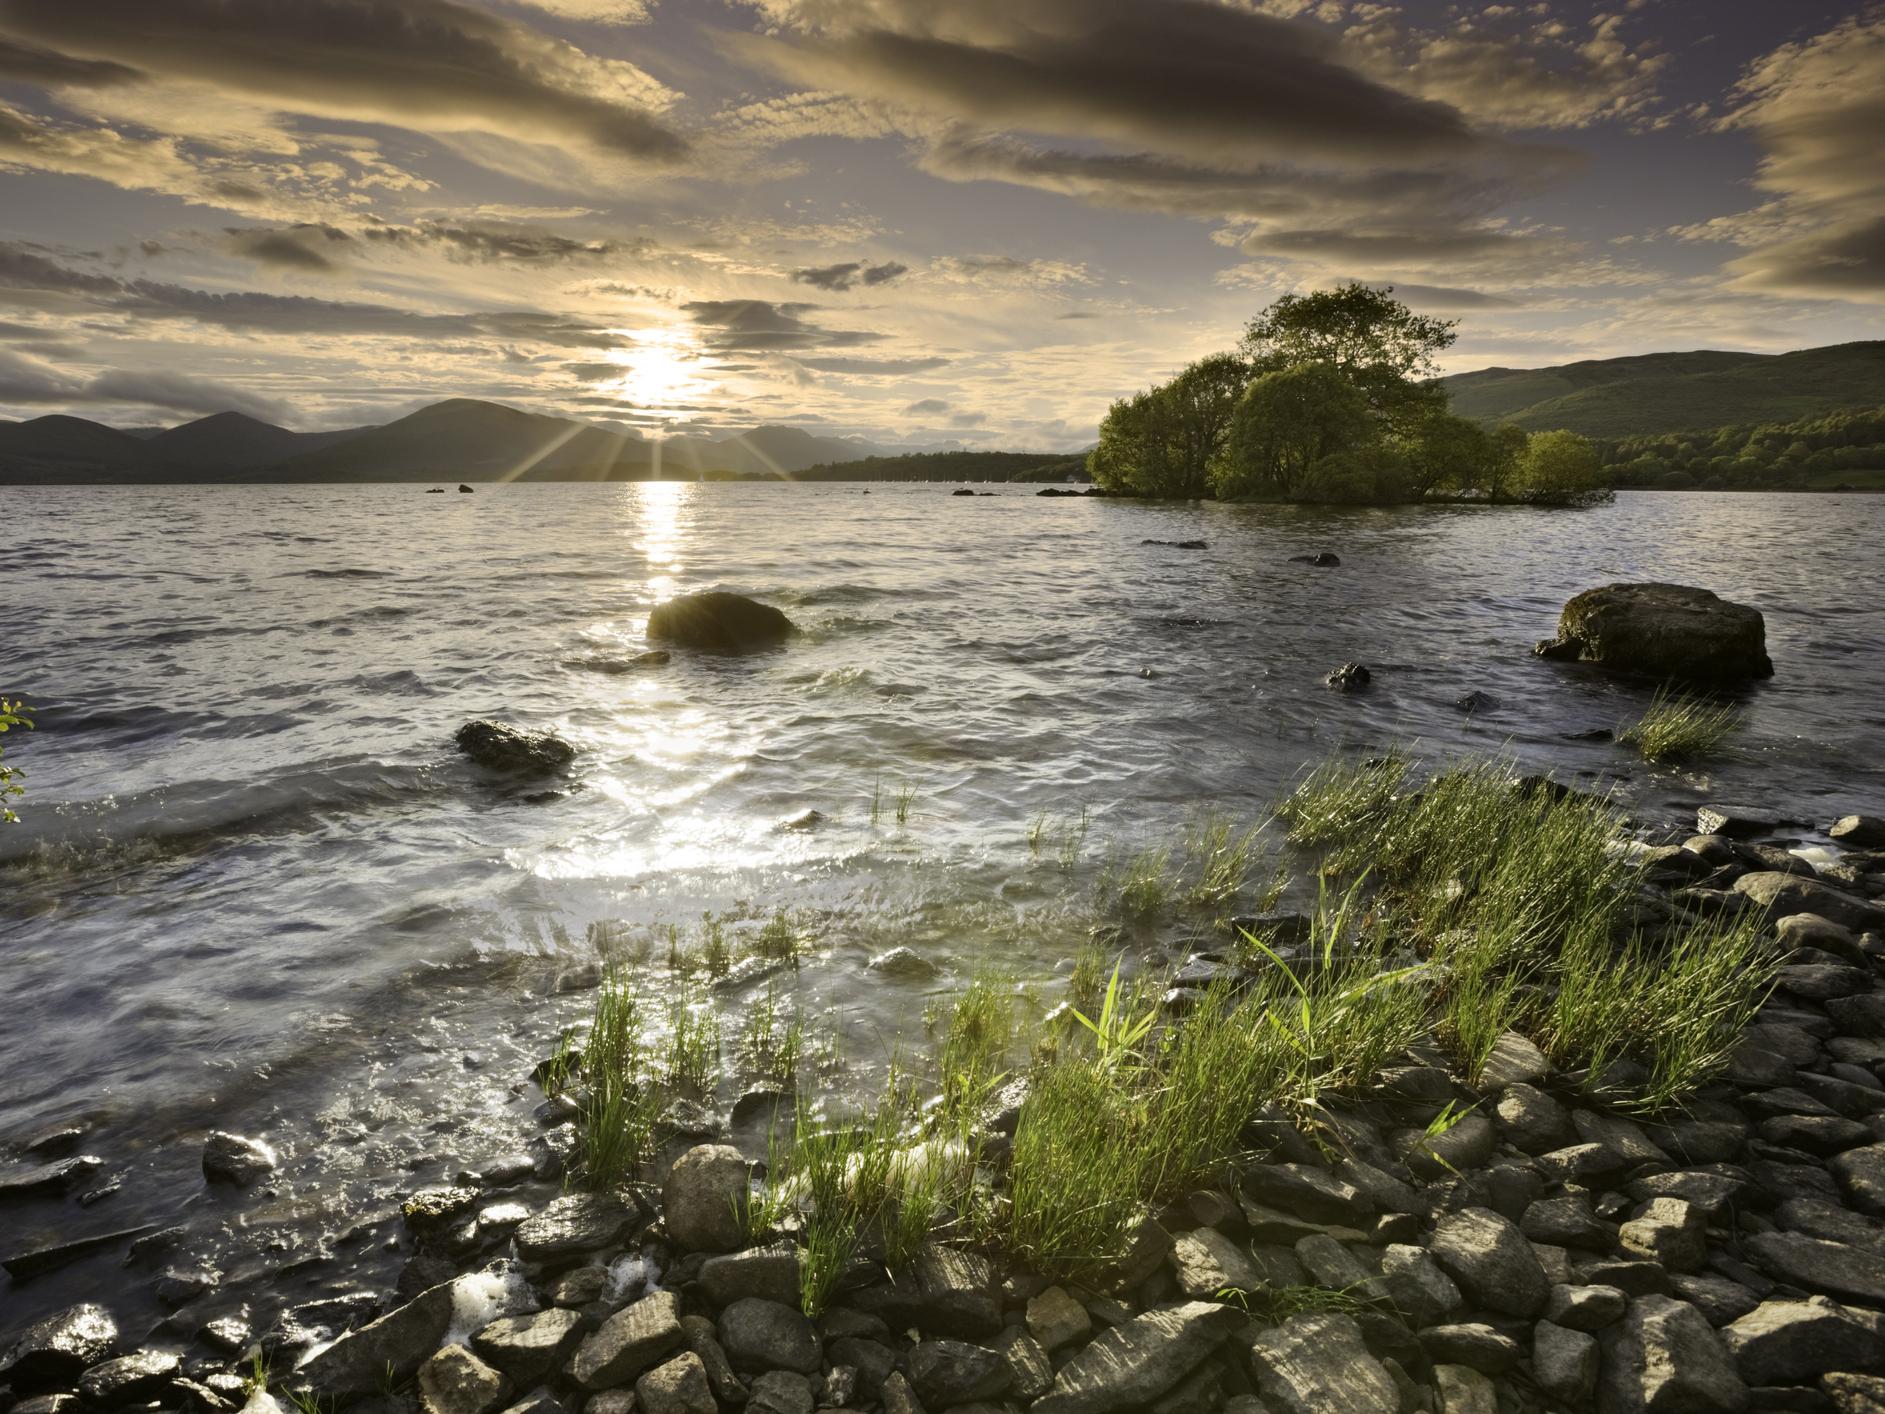 Even Loch Lomond contained traces of plastic pollution